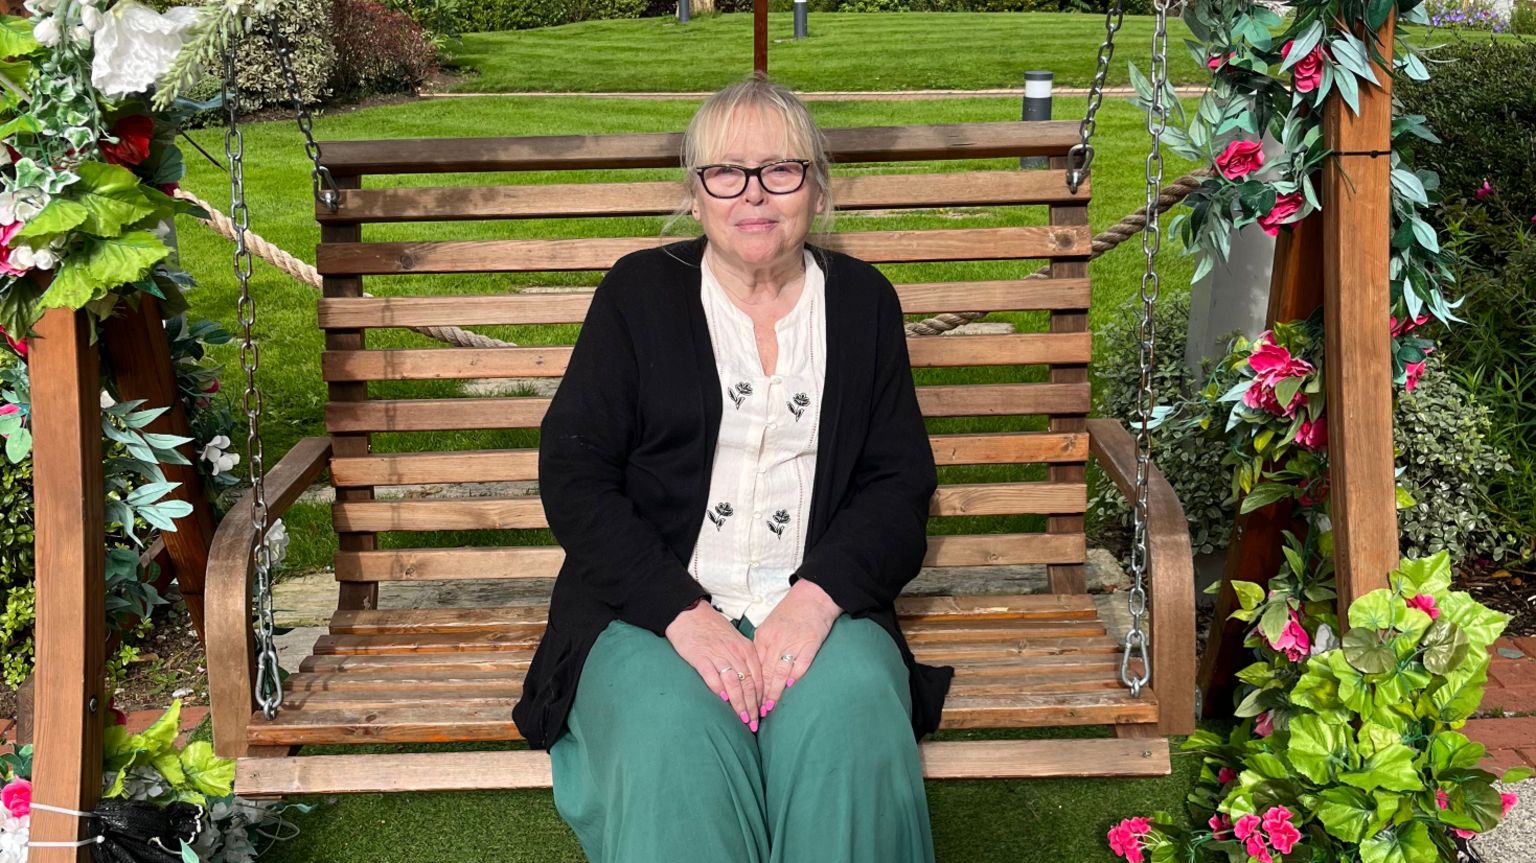 Hazel Busby sitting on a wooden swing bench surrounded by flowers